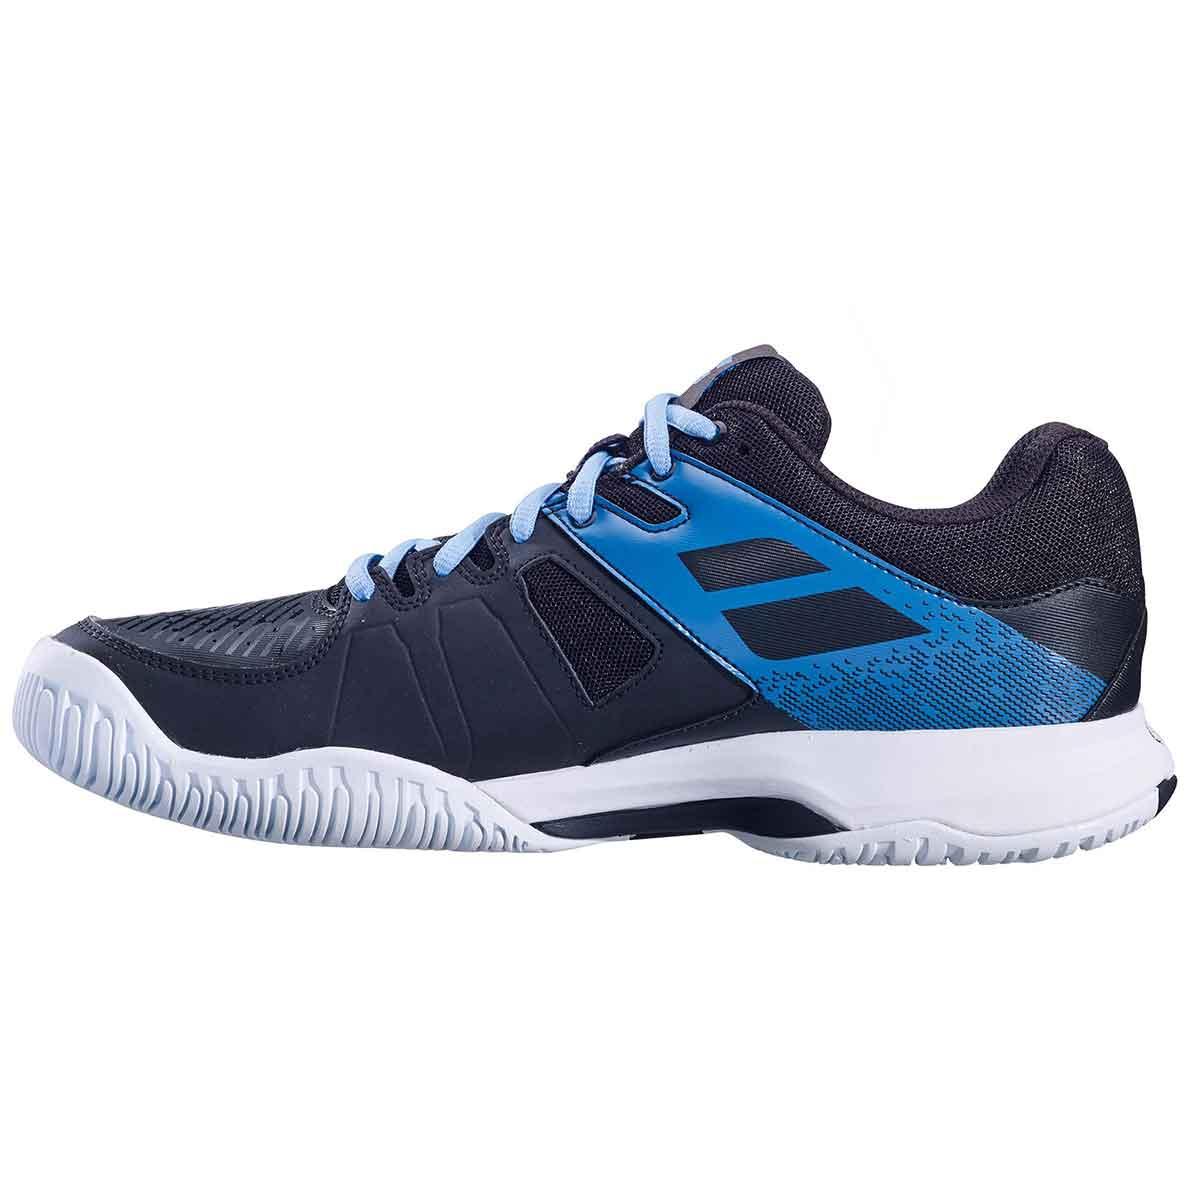 Buy Babolat Pulsion All Court Mens Tennis Shoes Online in India